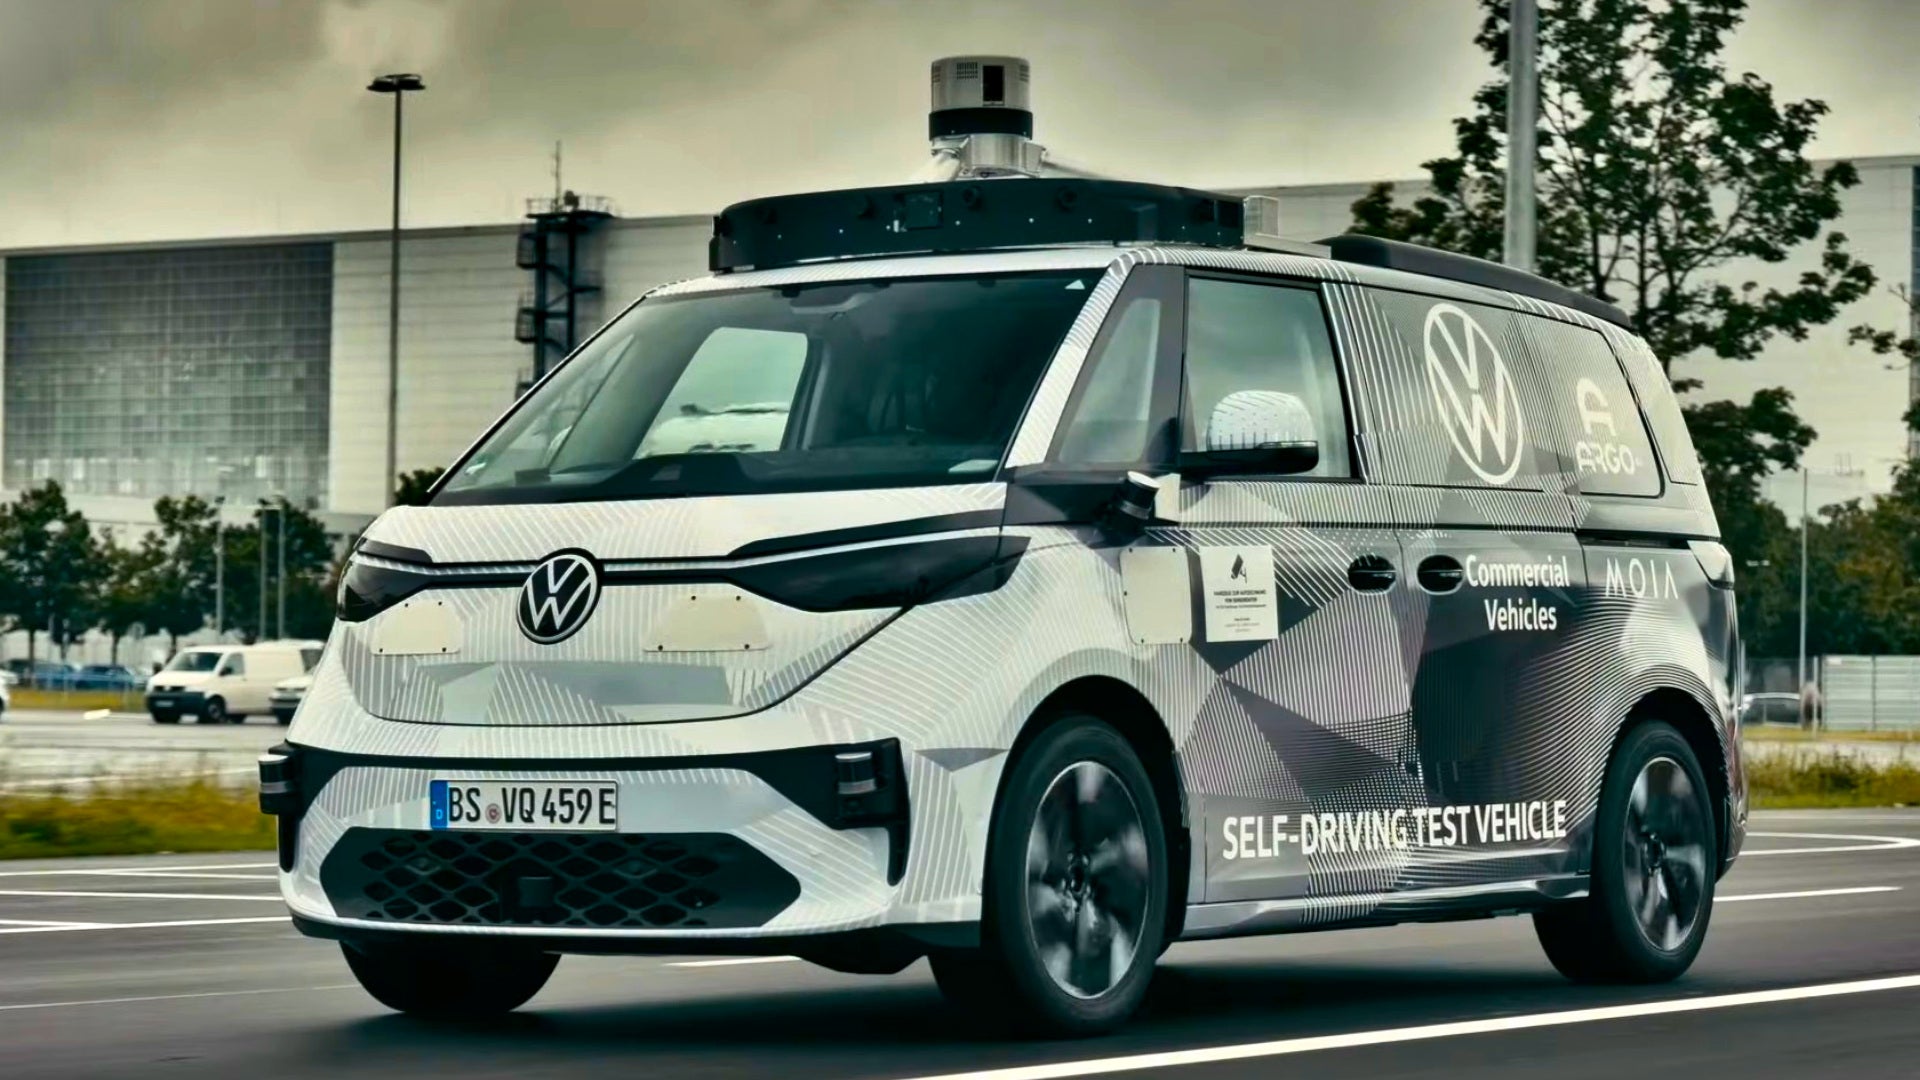 VW Plans Self Driving Taxis and Delivery Vans Using the ID